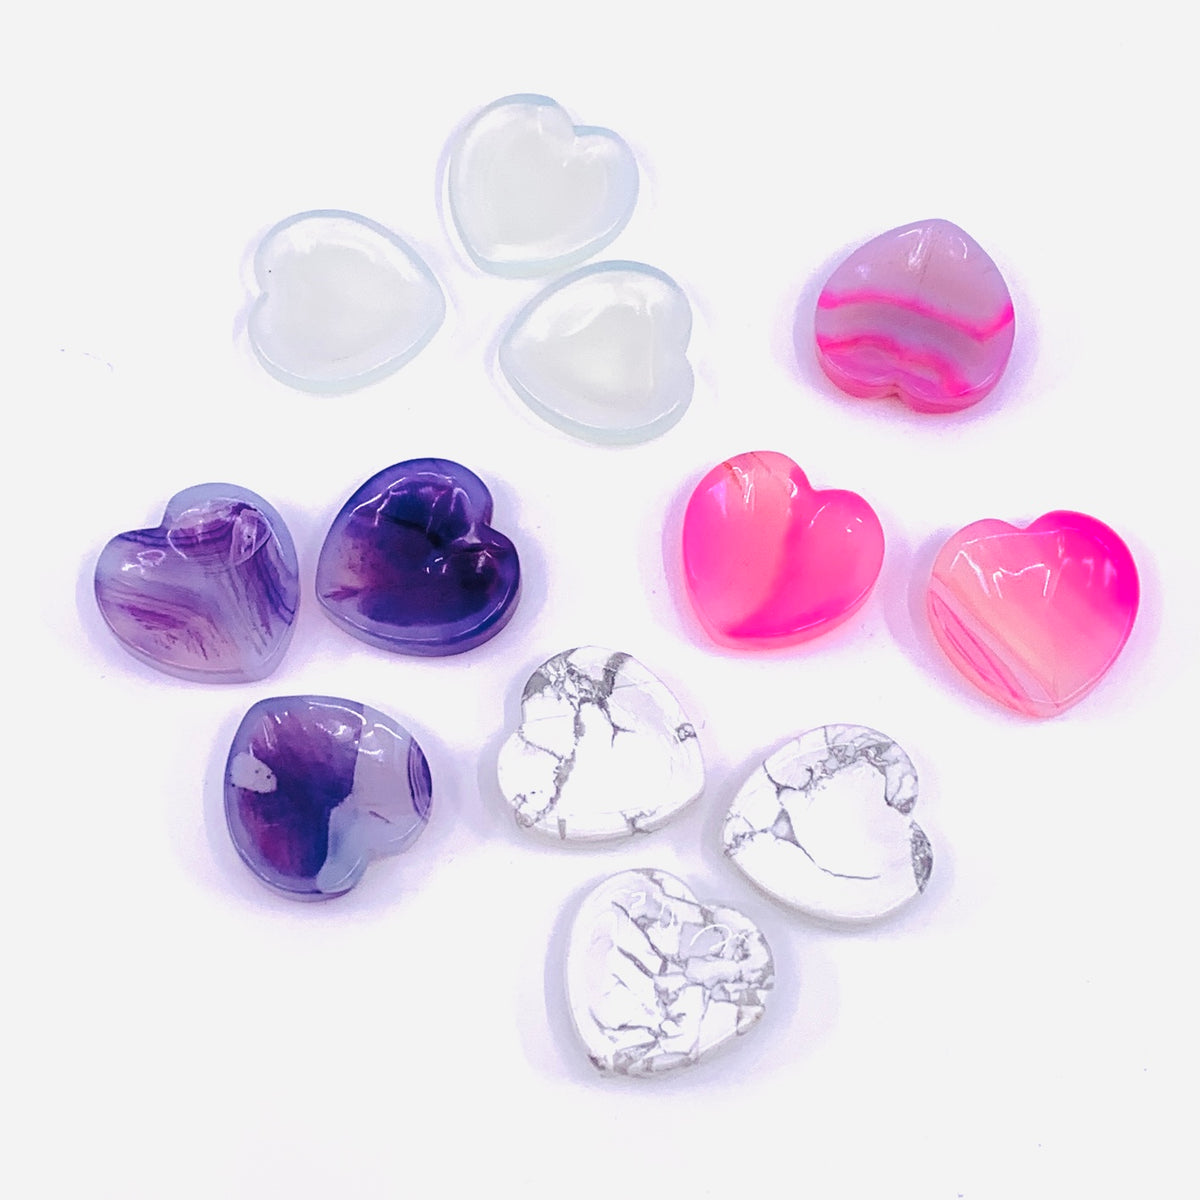 Small Heart Worry Stone - Pink Agate